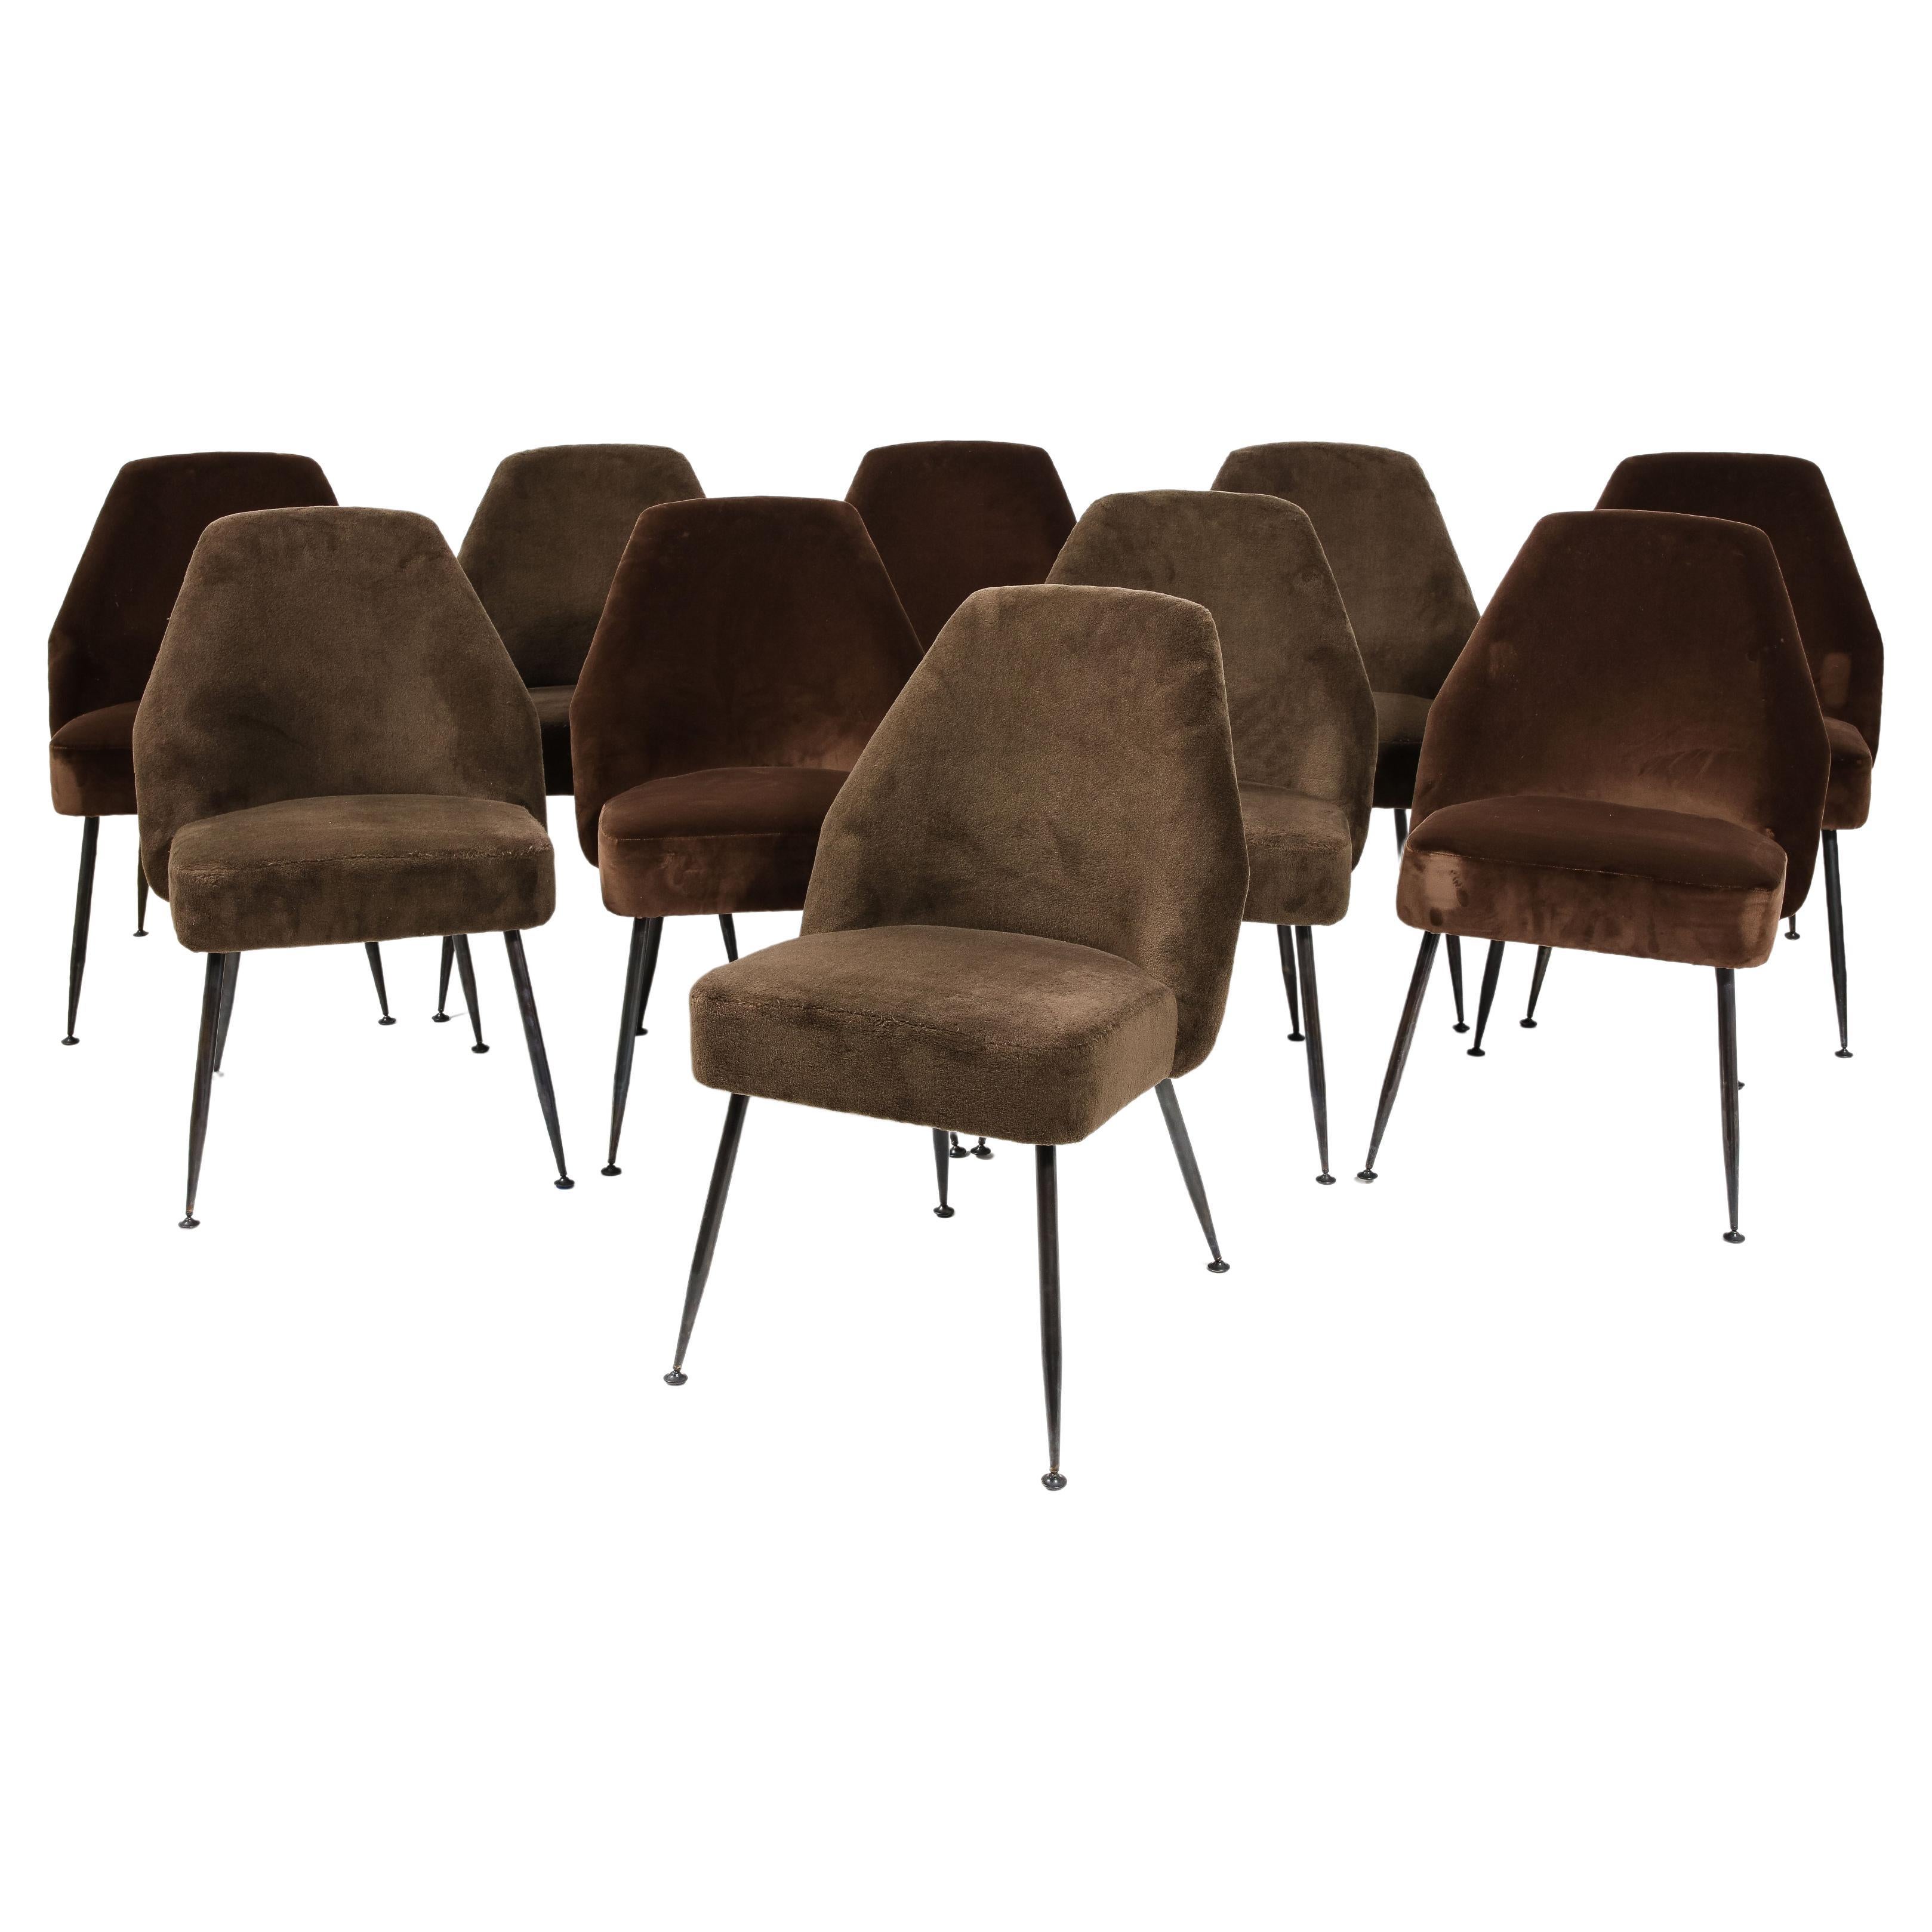 Set of Ten Carlo Pagani "Campanule" Dining Chairs, Italy 1960's For Sale